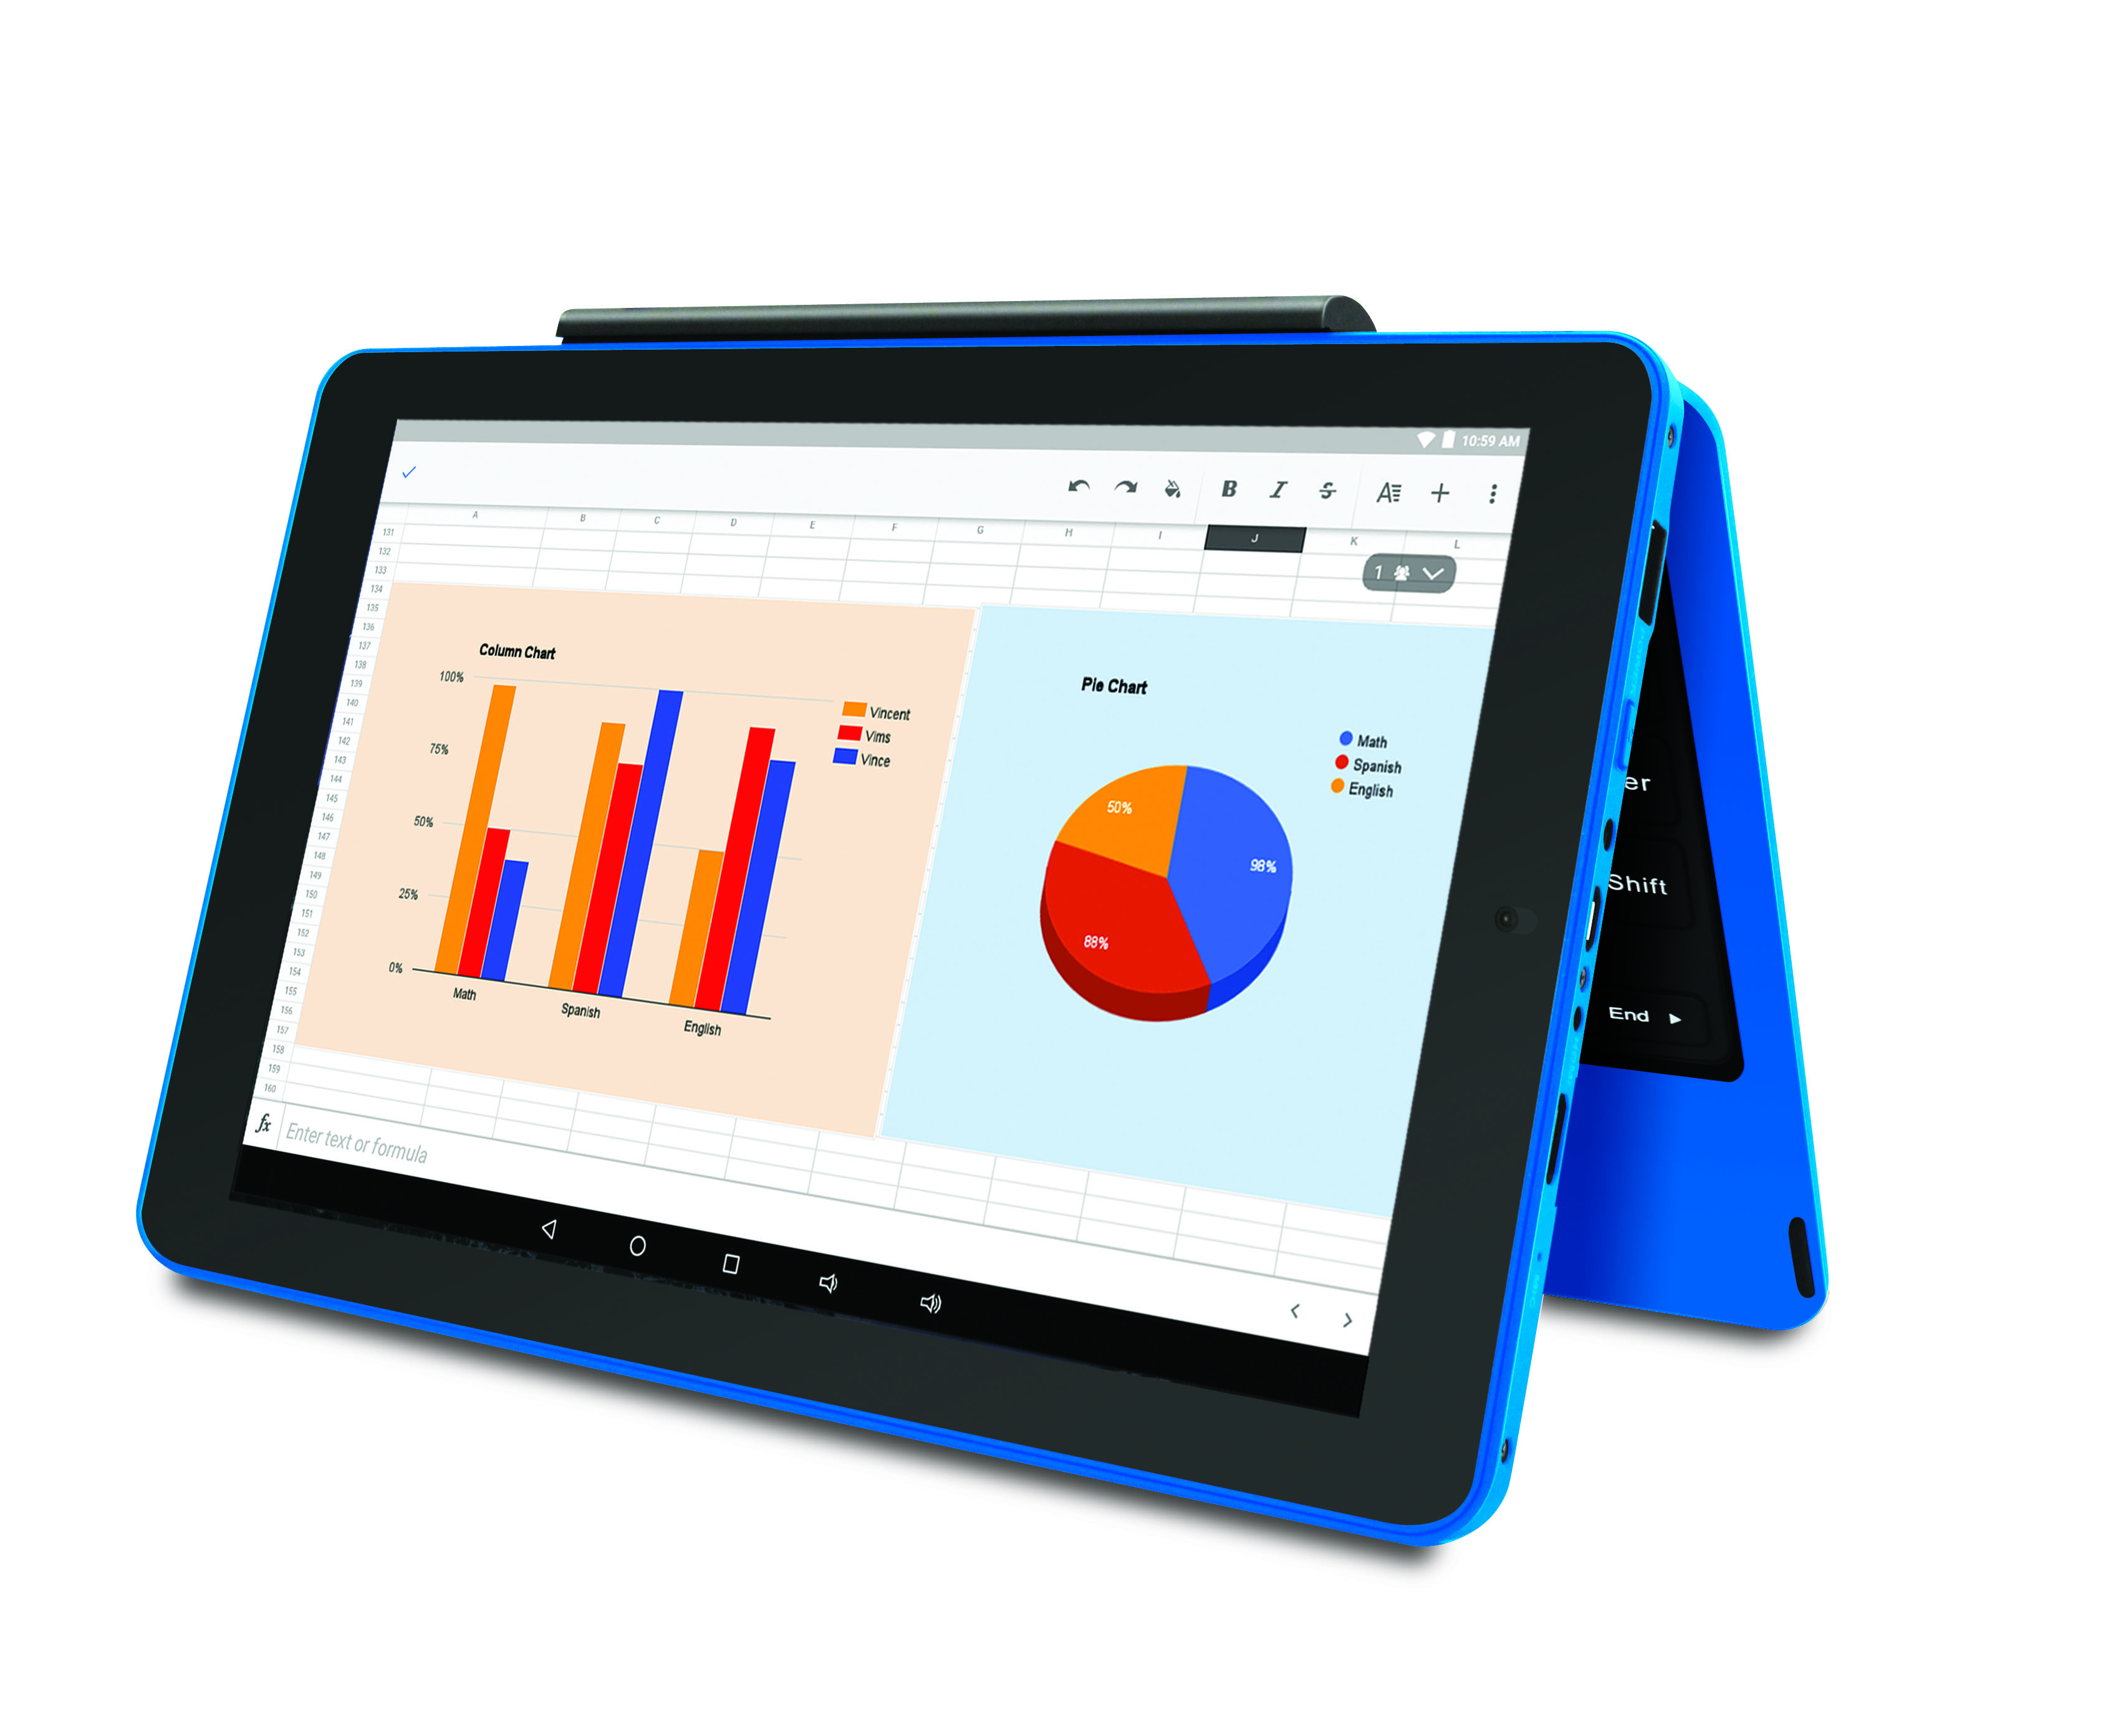 RCA Galileo Pro 11.5" 32GB 2-in-1 Tablet with Keyboard Case Android OS, Blue (Google Classroom Ready) - image 2 of 5